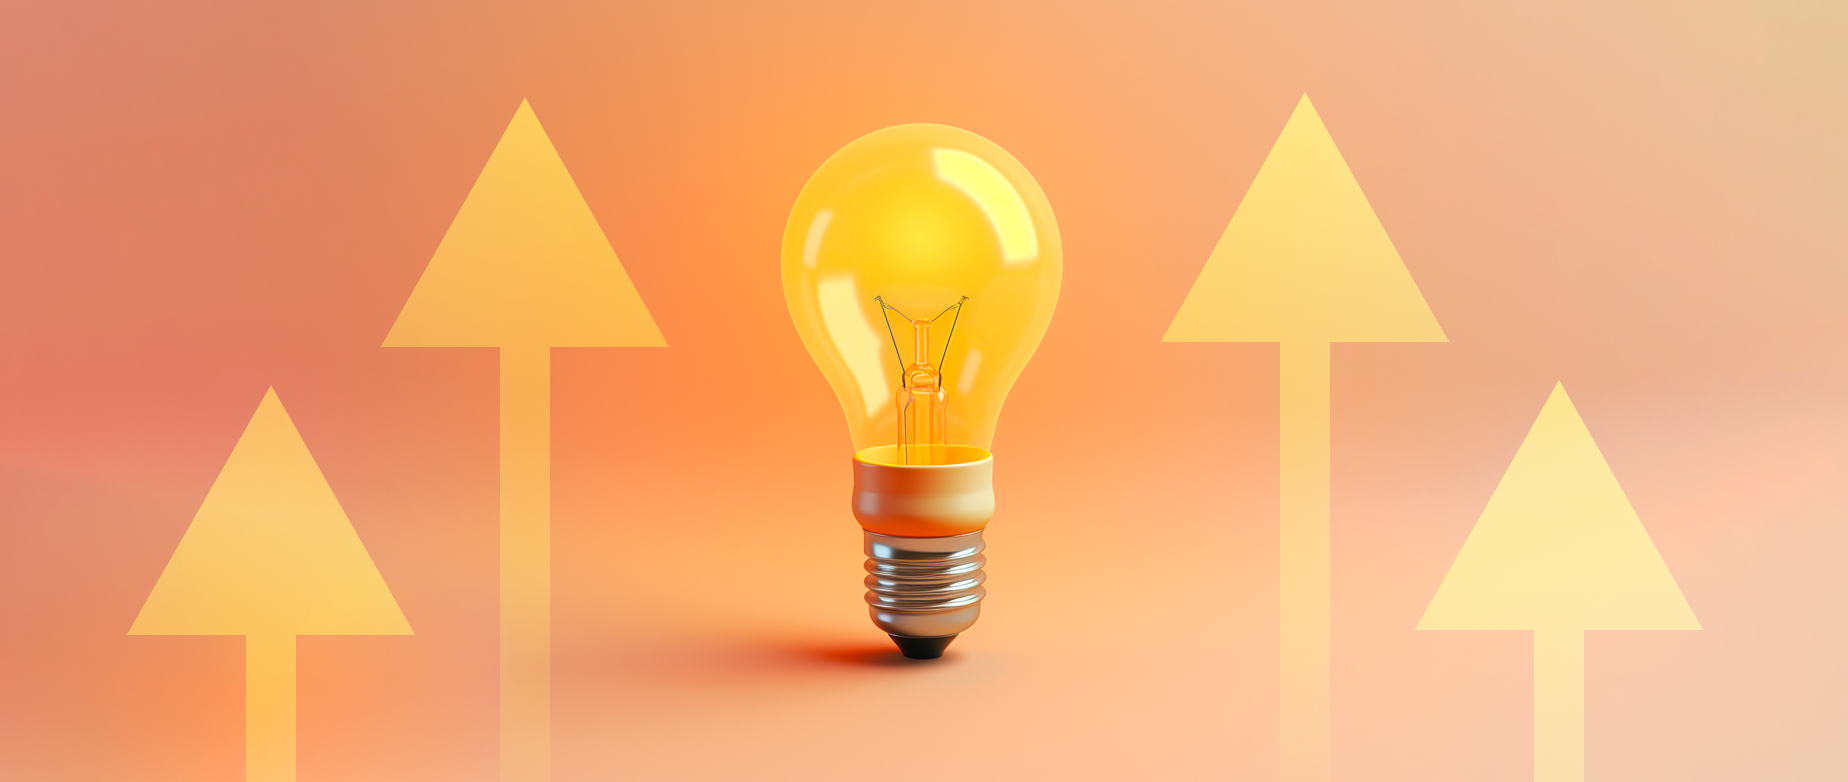 Yellow lightbulb surrounded by arrows pointing up on an orange background: low-cost business ideas